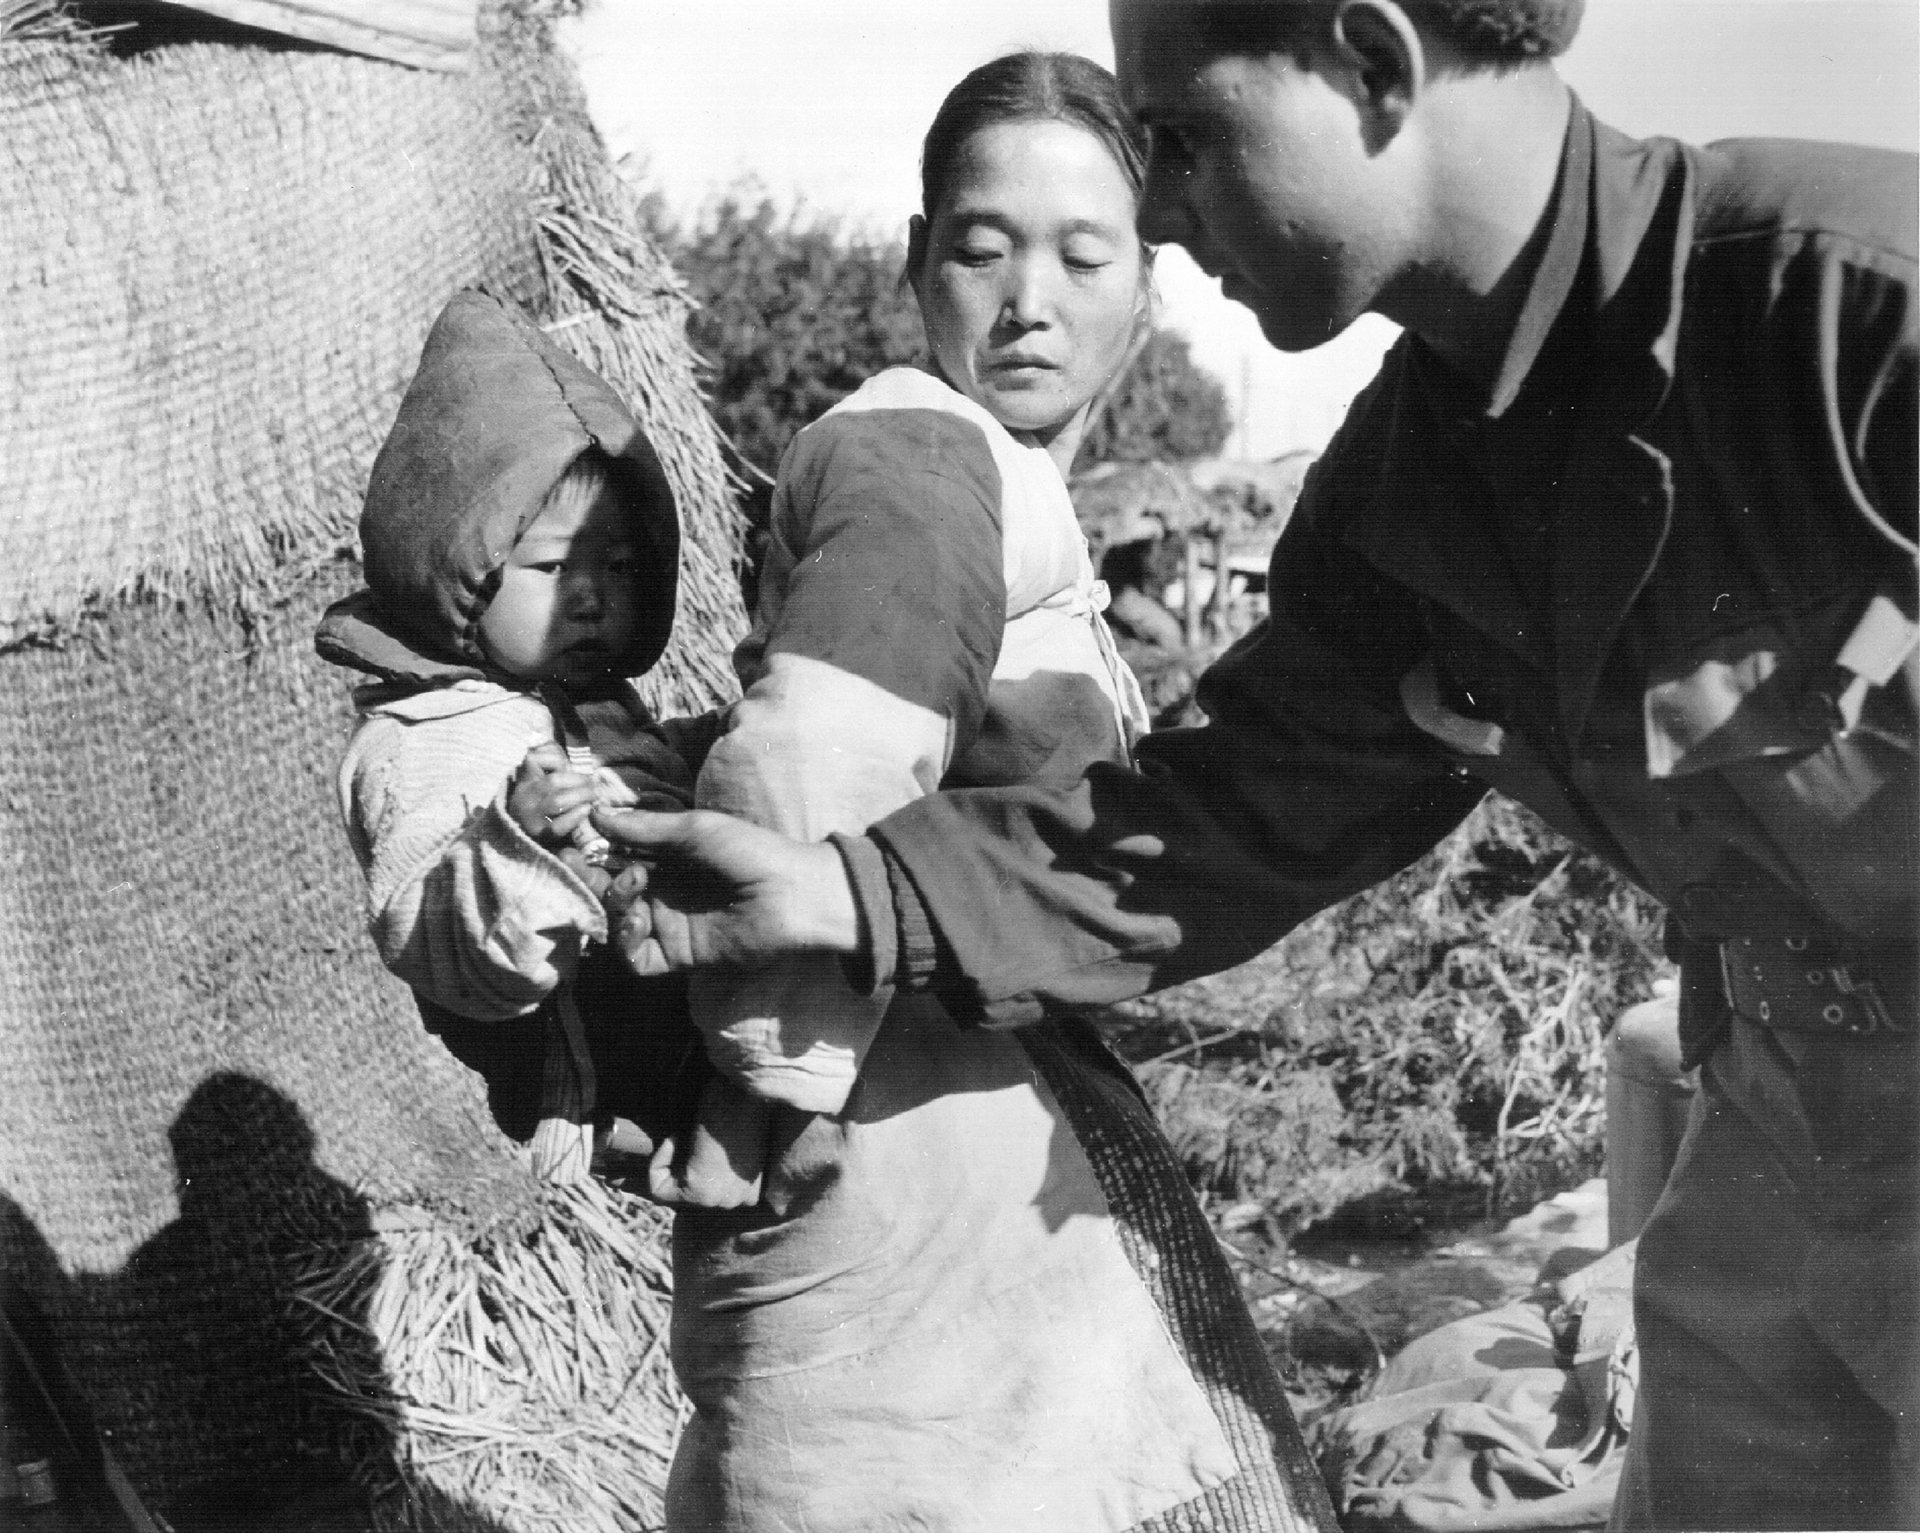 A black and white photo of a Korean woman standing with her child, and a U.S. soldier who is giving the child a piece of candy.